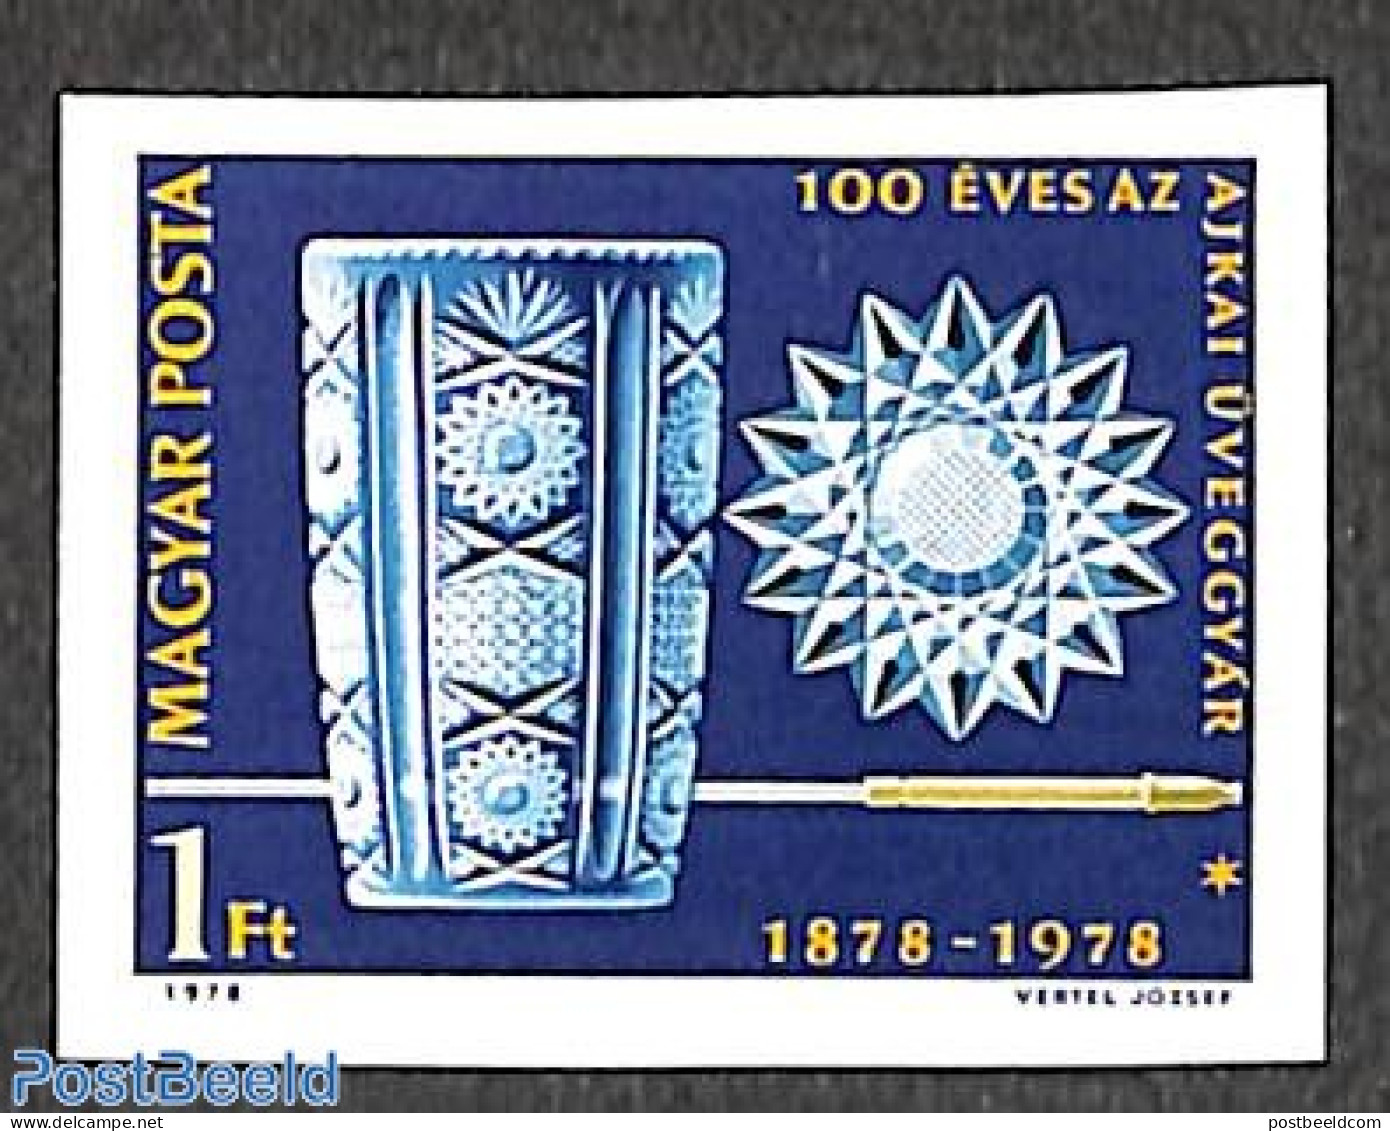 Hungary 1978 Glass Factory 1v Imperforated, Mint NH, Art - Art & Antique Objects - Ungebraucht